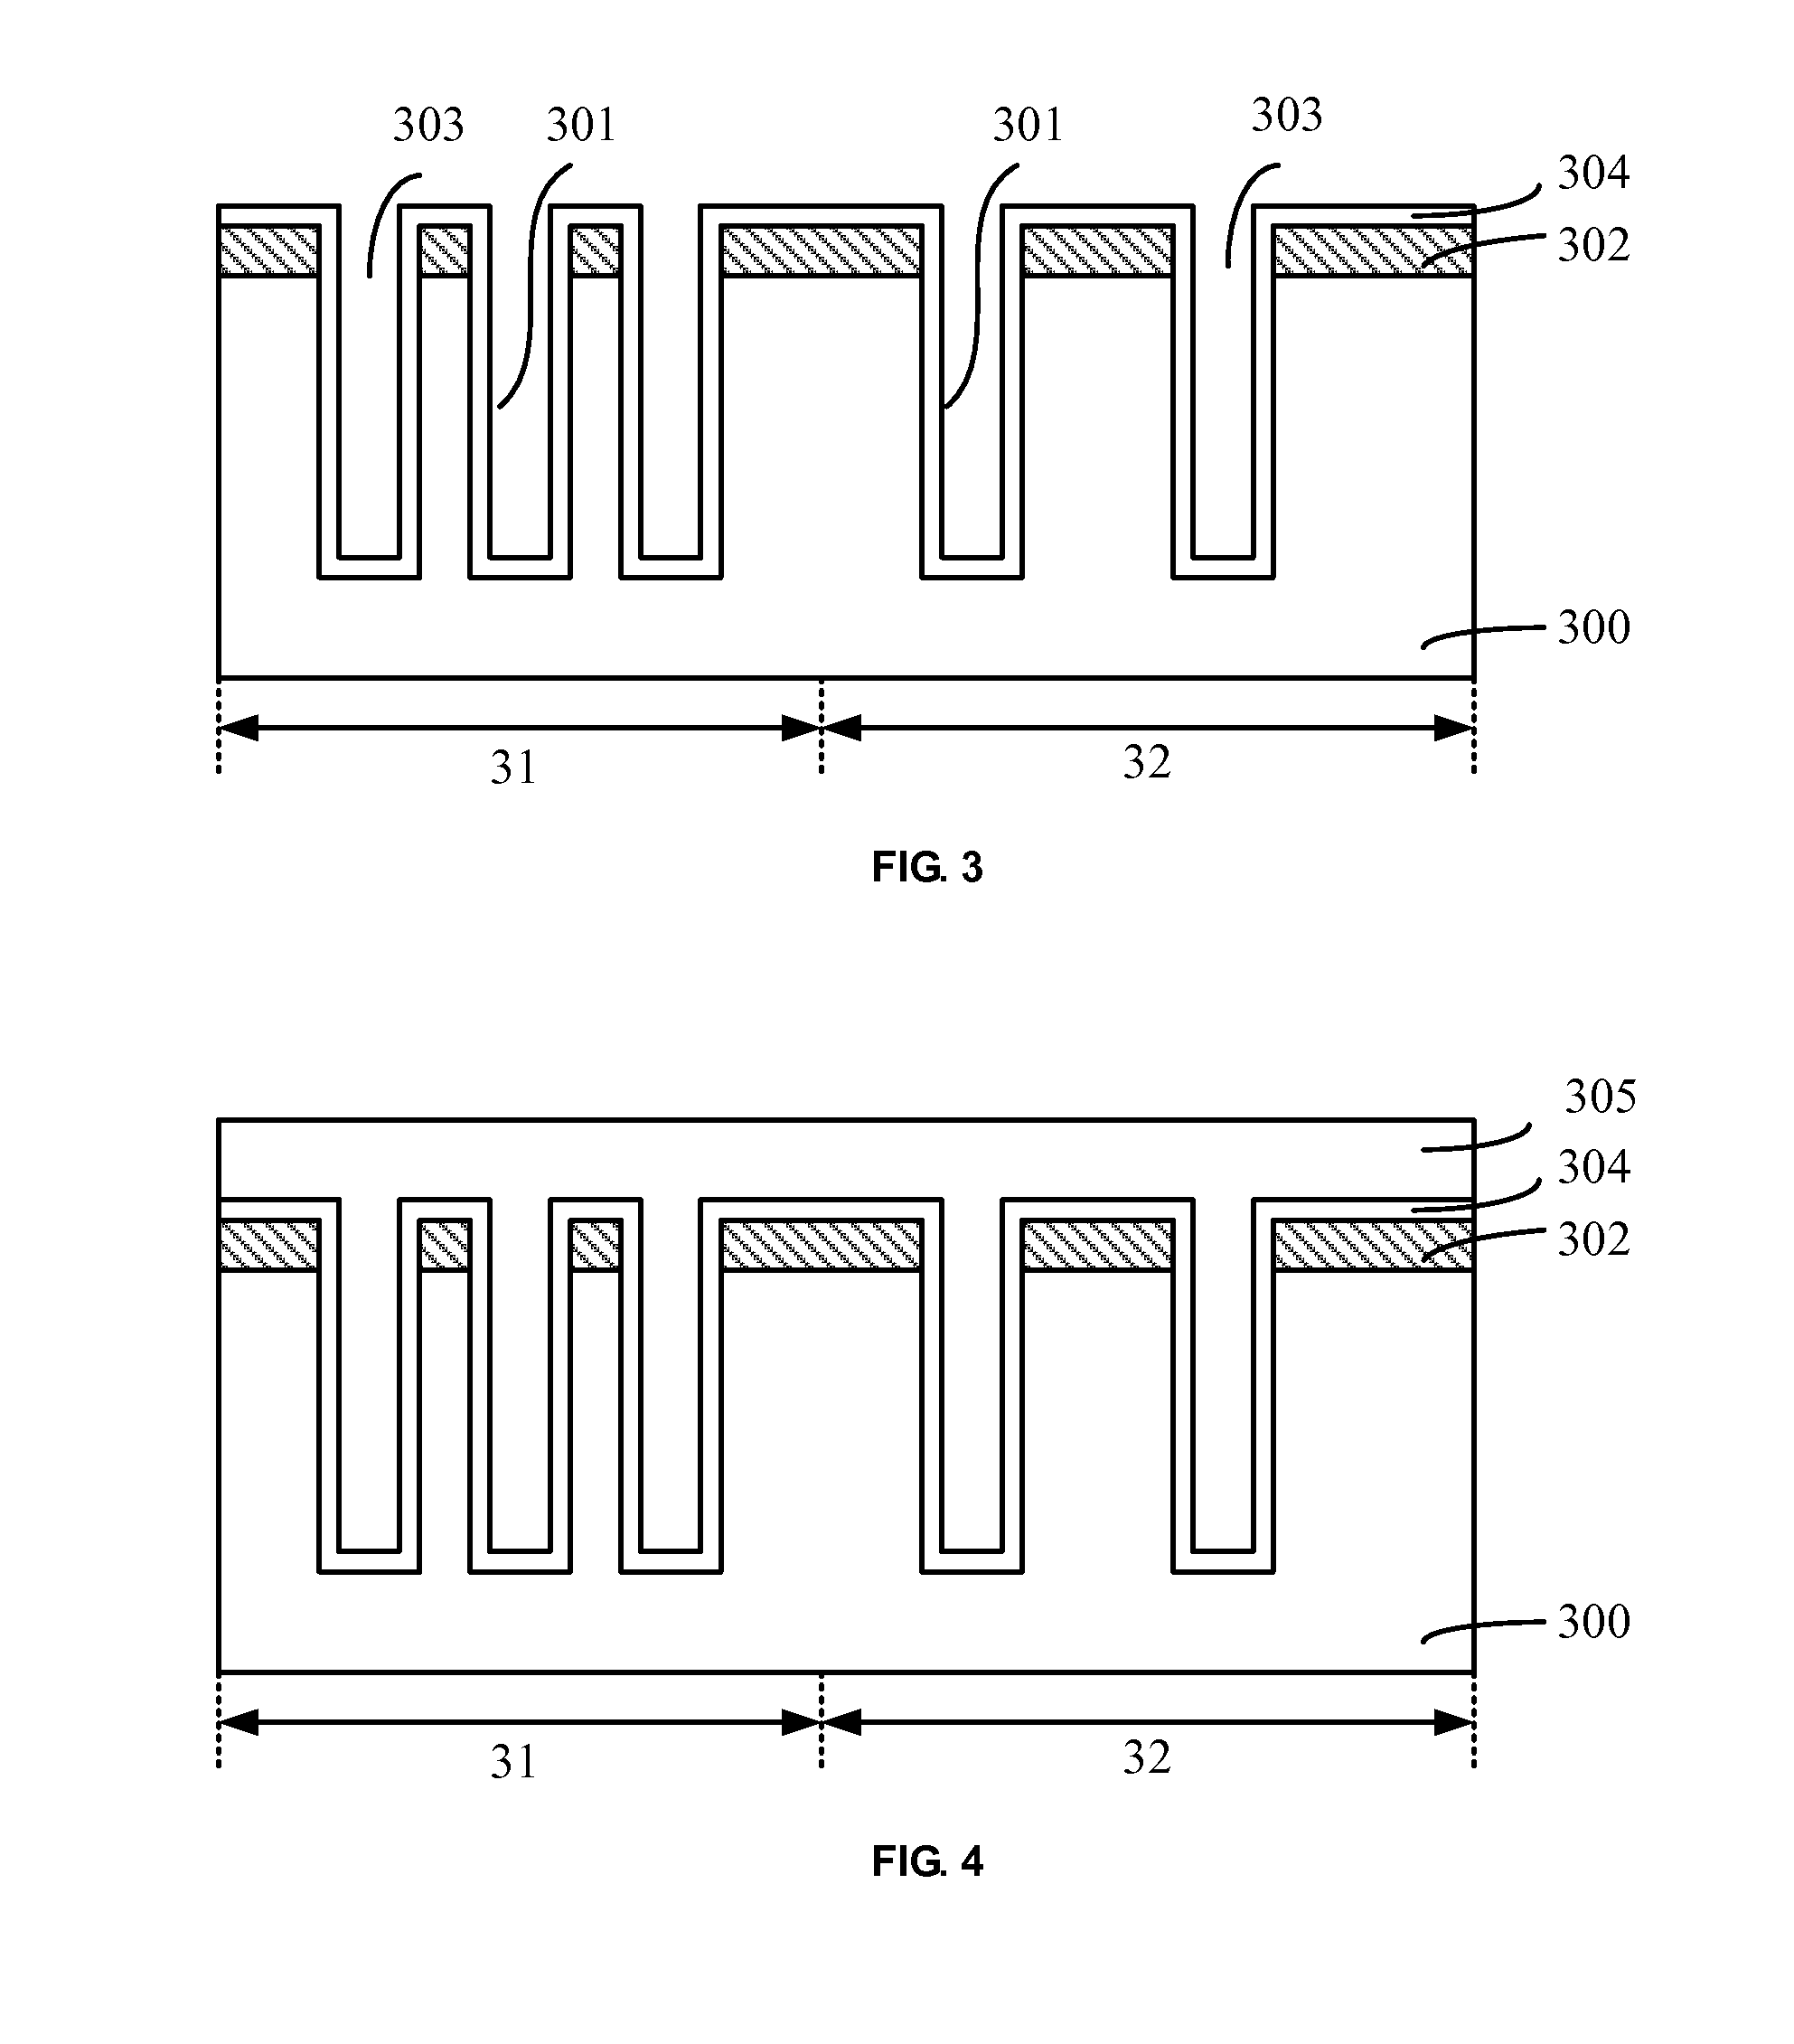 TSV layout structure and TSV interconnect structure, and fabrication methods thereof